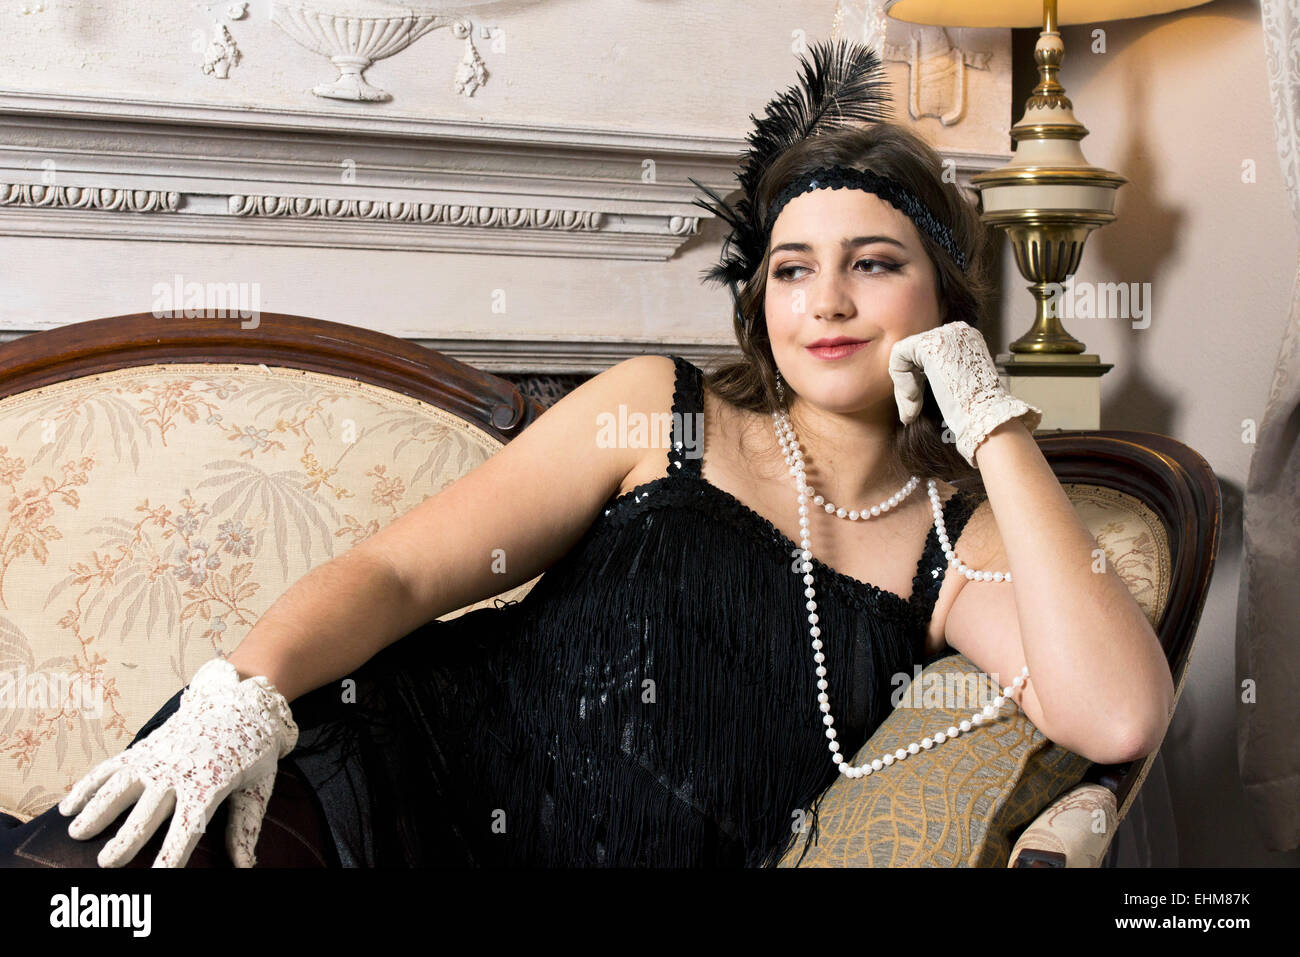 A portrait of a woman dressed in vintage 1920's flapper style clothing Stock Photo